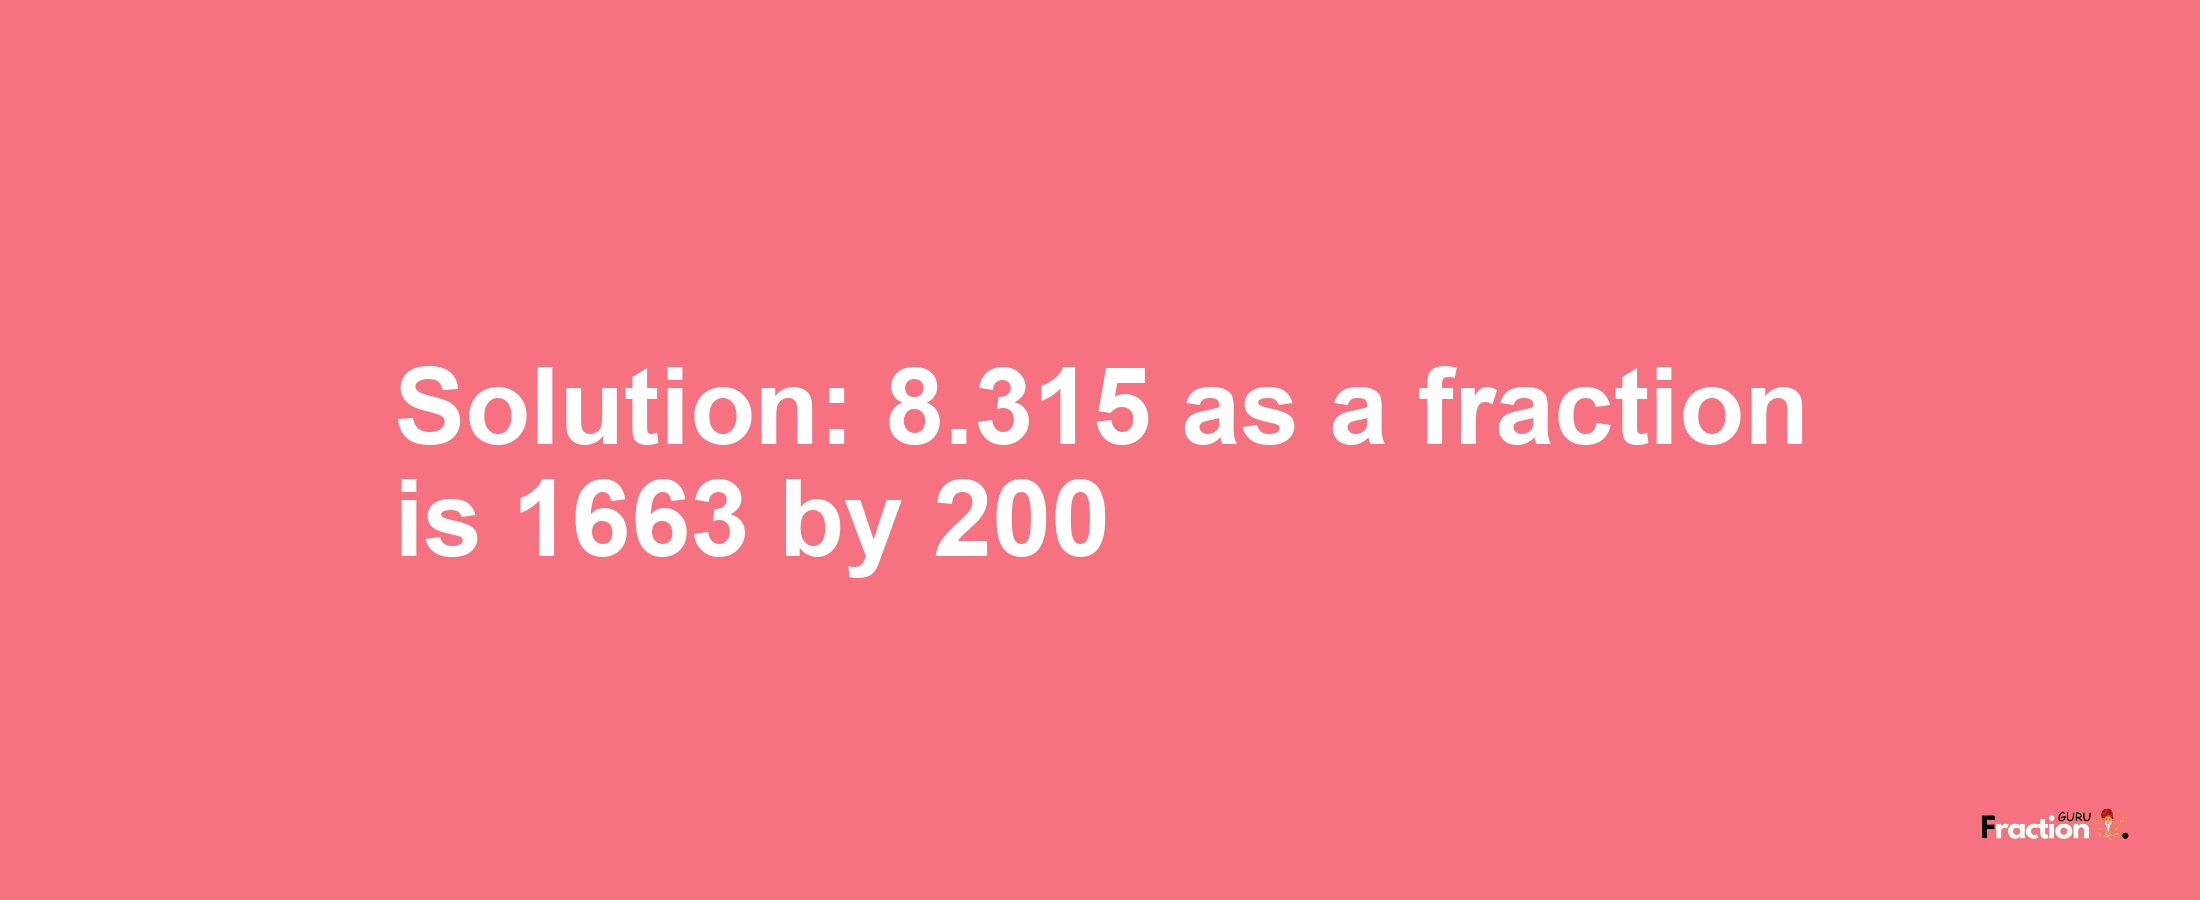 Solution:8.315 as a fraction is 1663/200